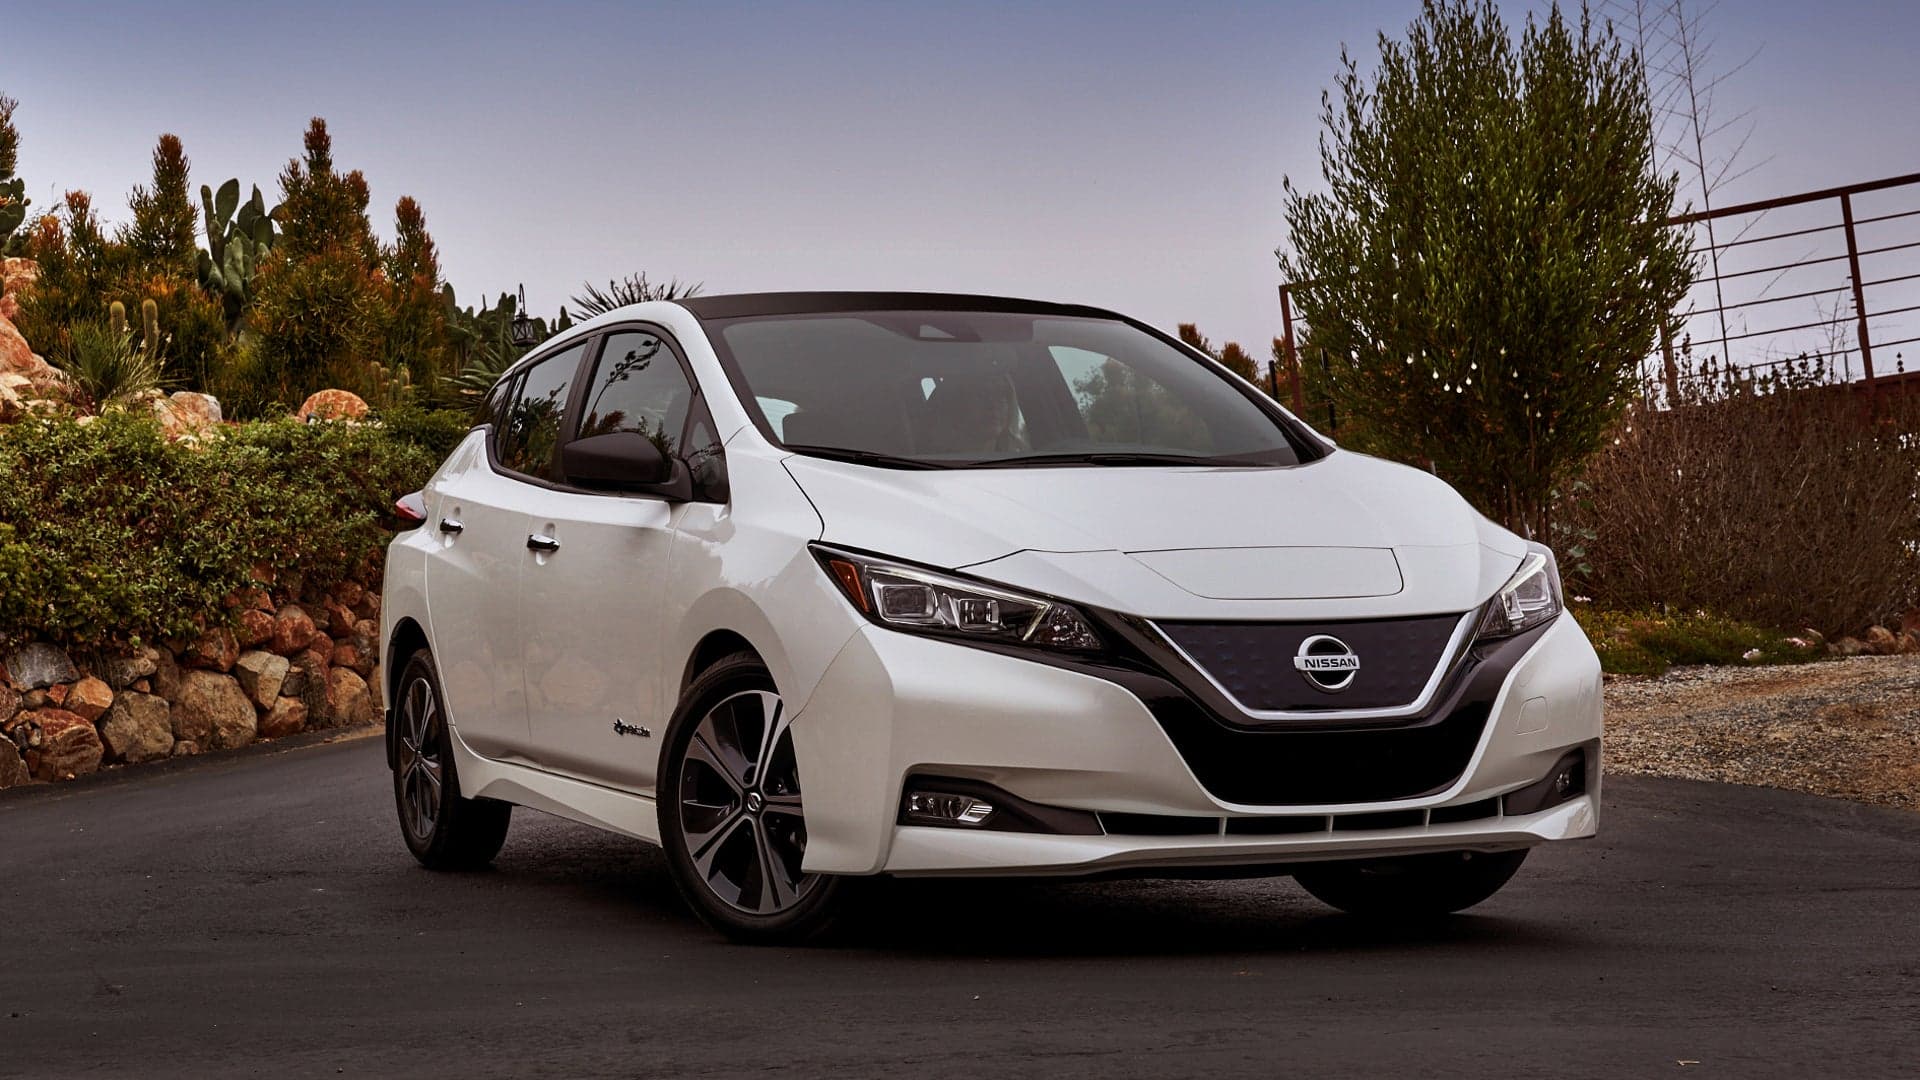 Sales of the New Nissan Leaf Are Off to a Great Start